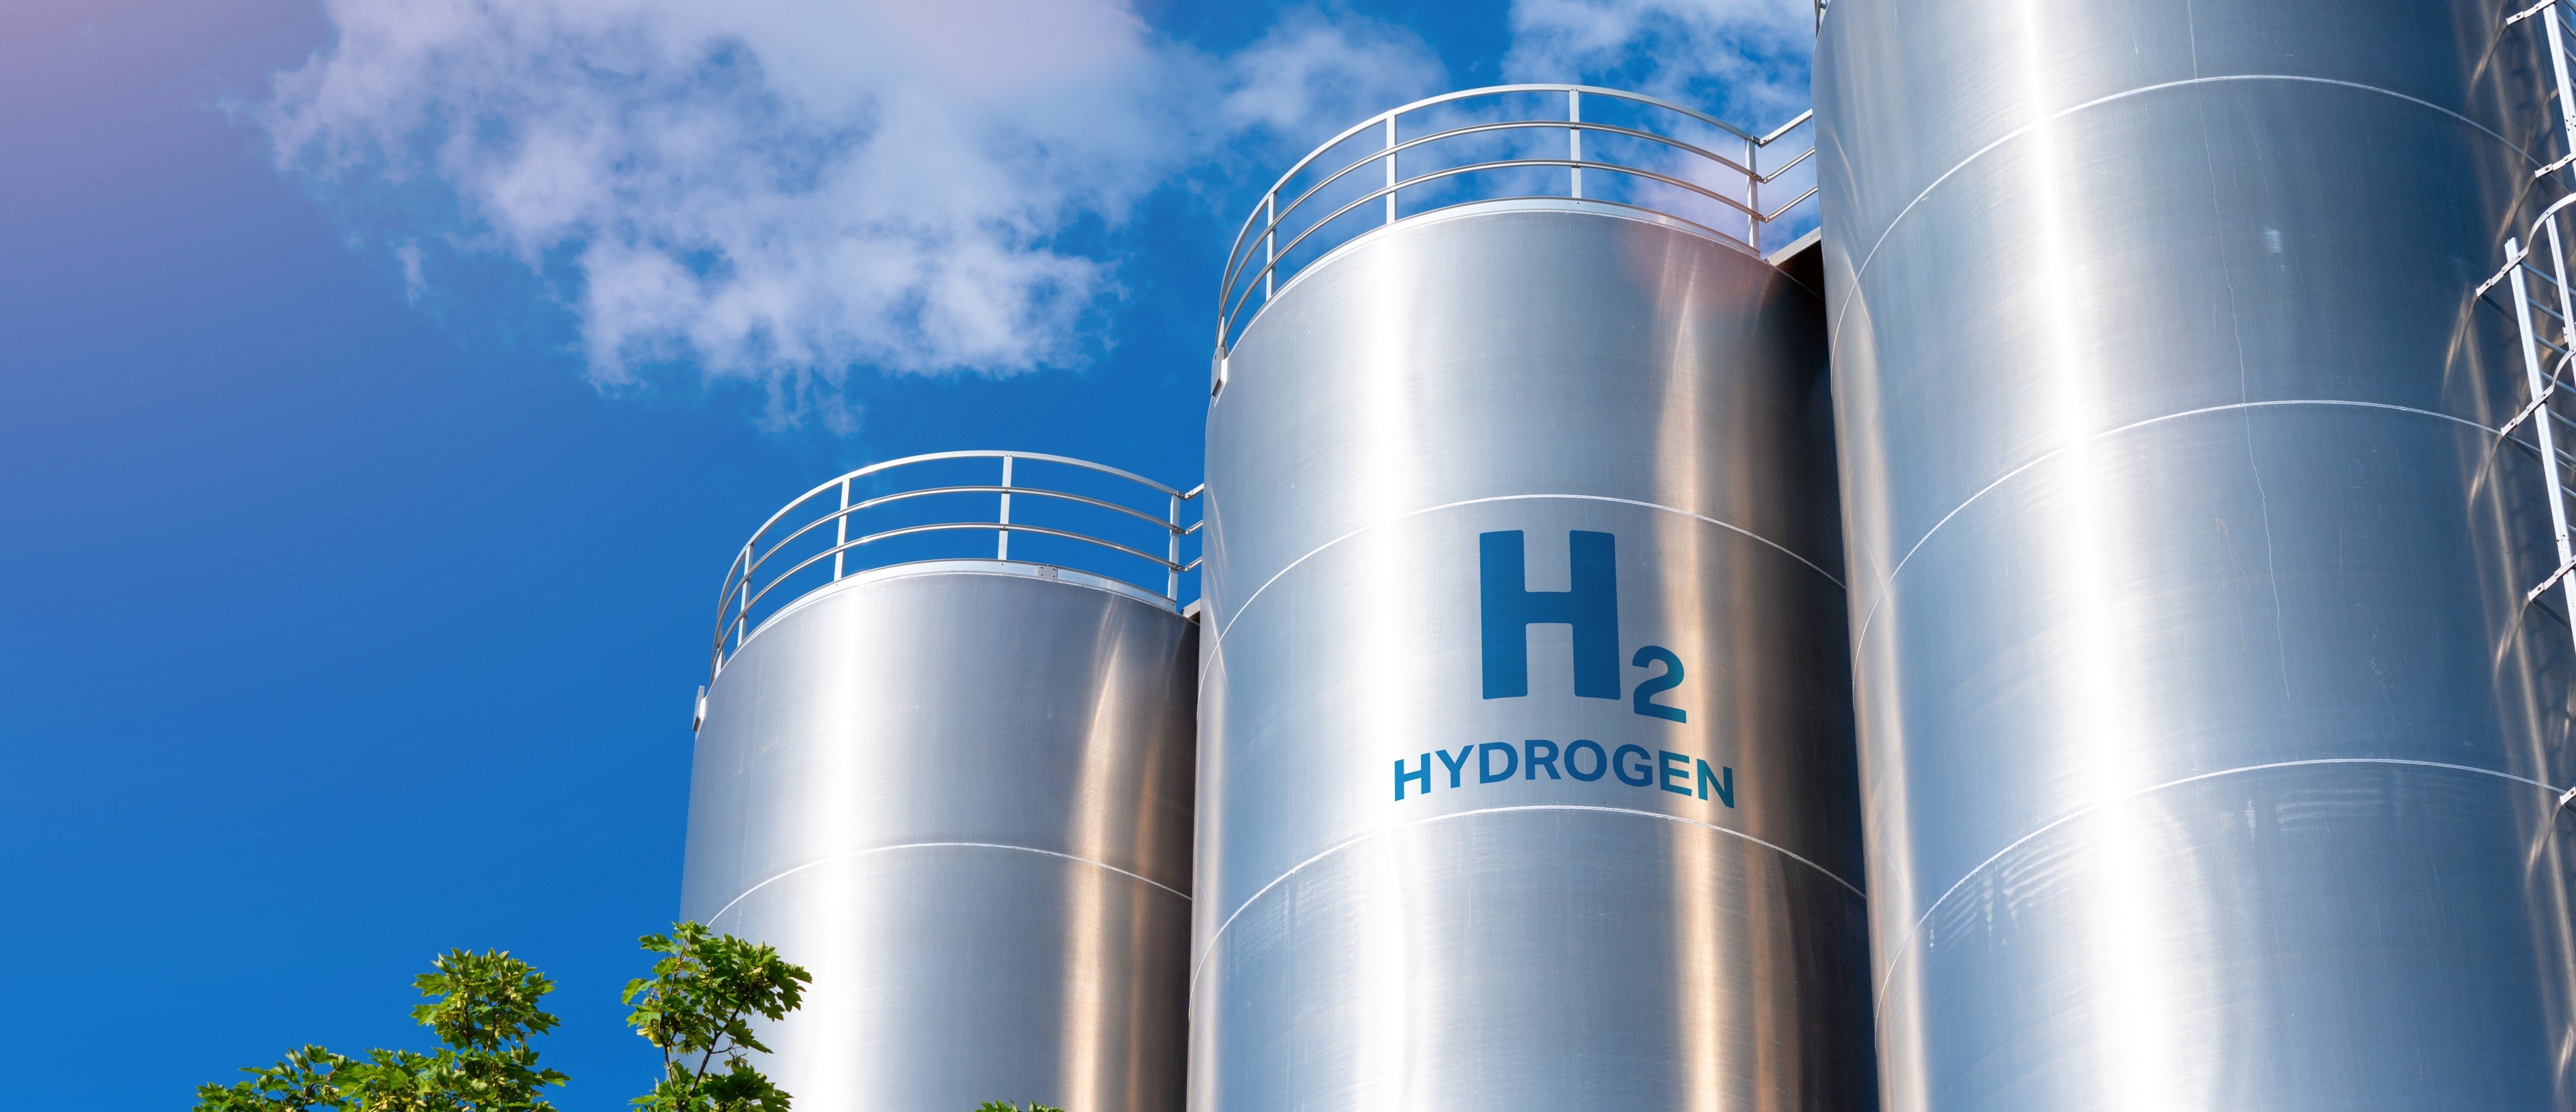 Nine applications of hydrogen energy trial projects have been given in-principle approval since March 24. Photo: Shutterstock